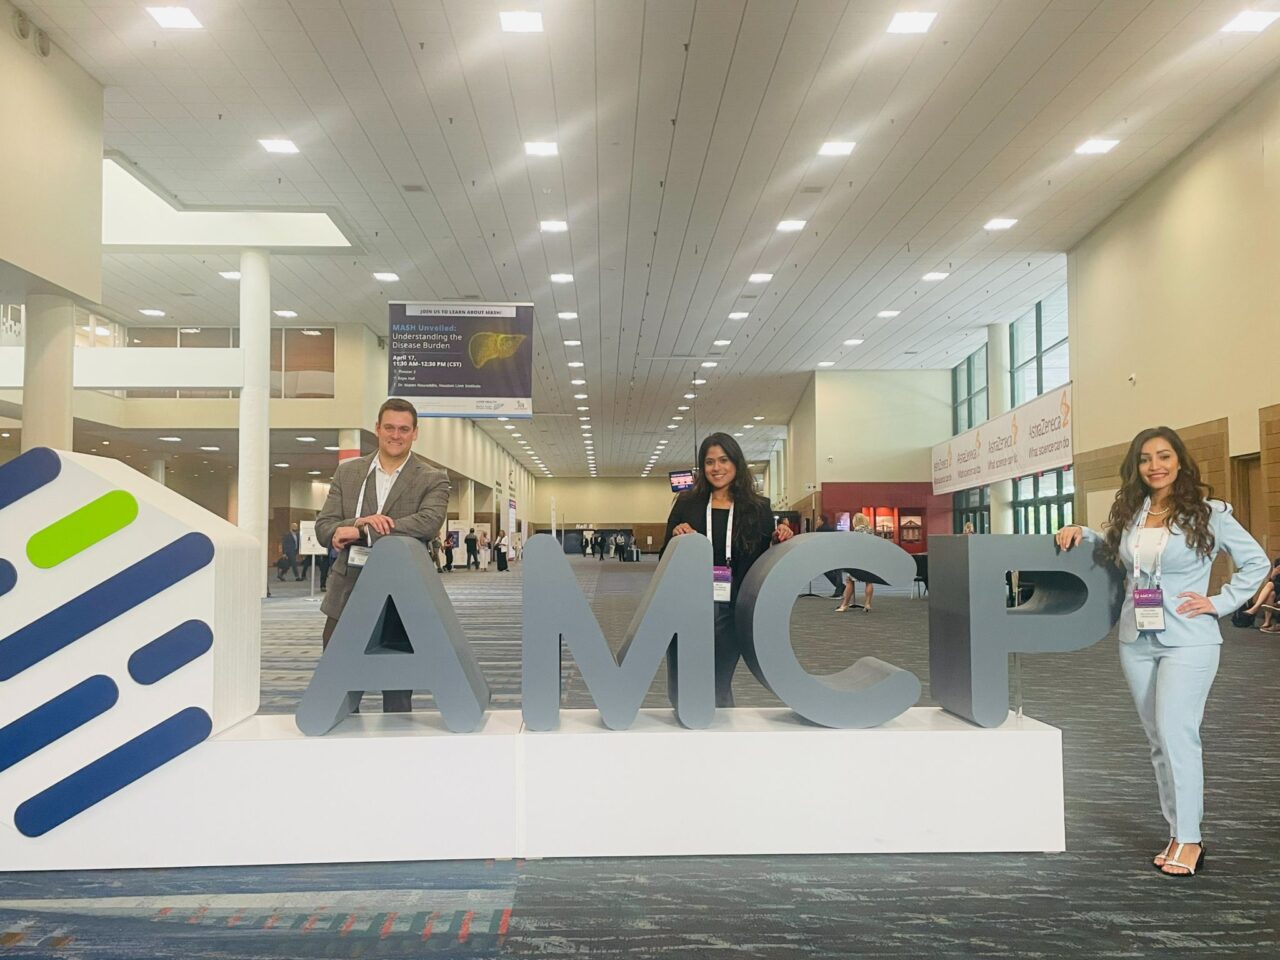 Jouliana Sadek: An enriching learning experience attending the AMCP managed care pharmacy meeting